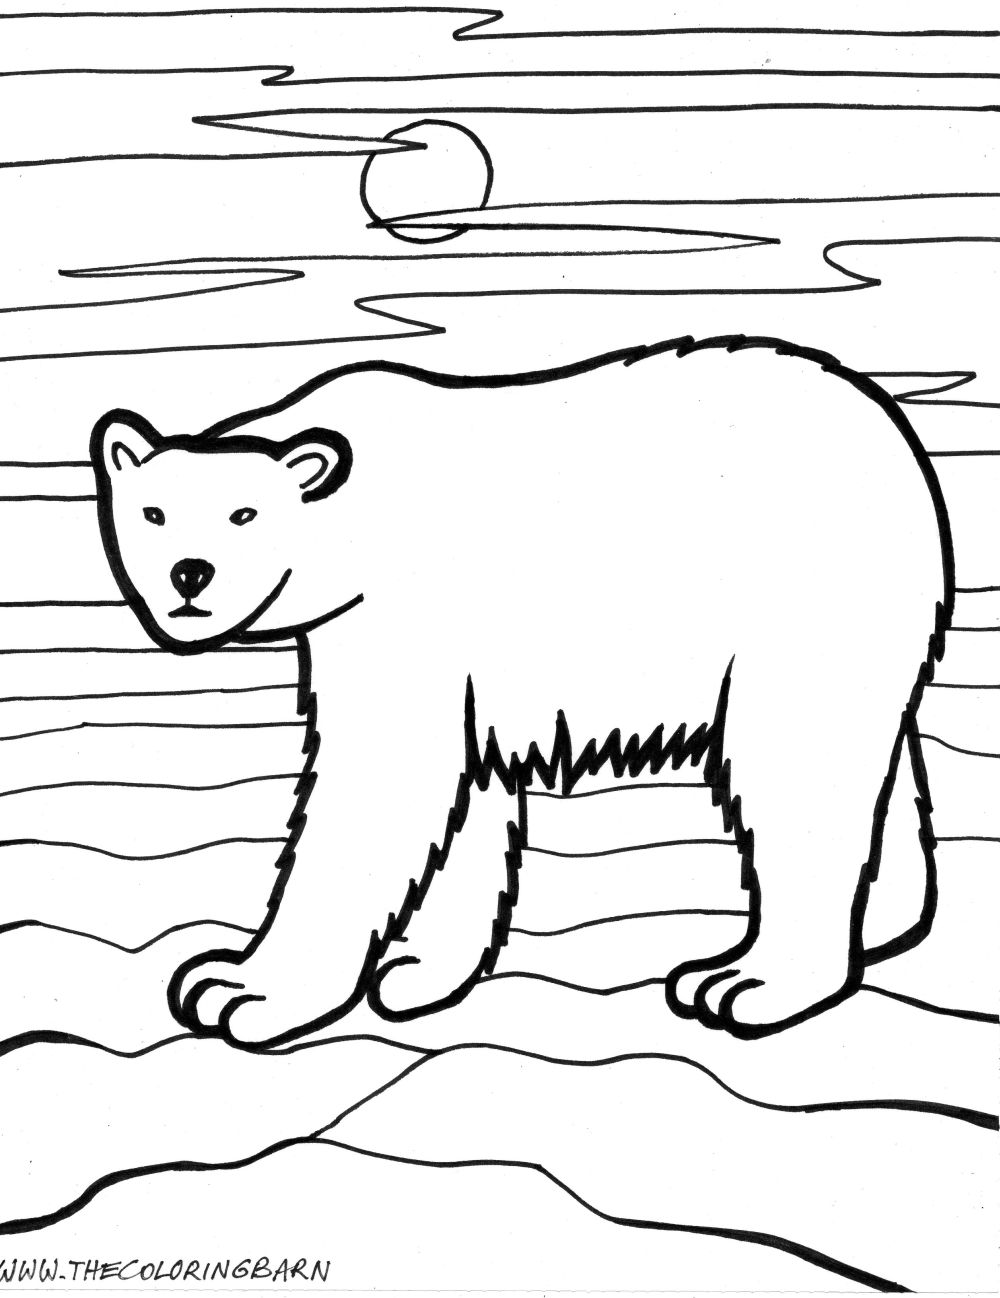 Free Coloring Pages Of Arctic Animals | High Quality Coloring Pages